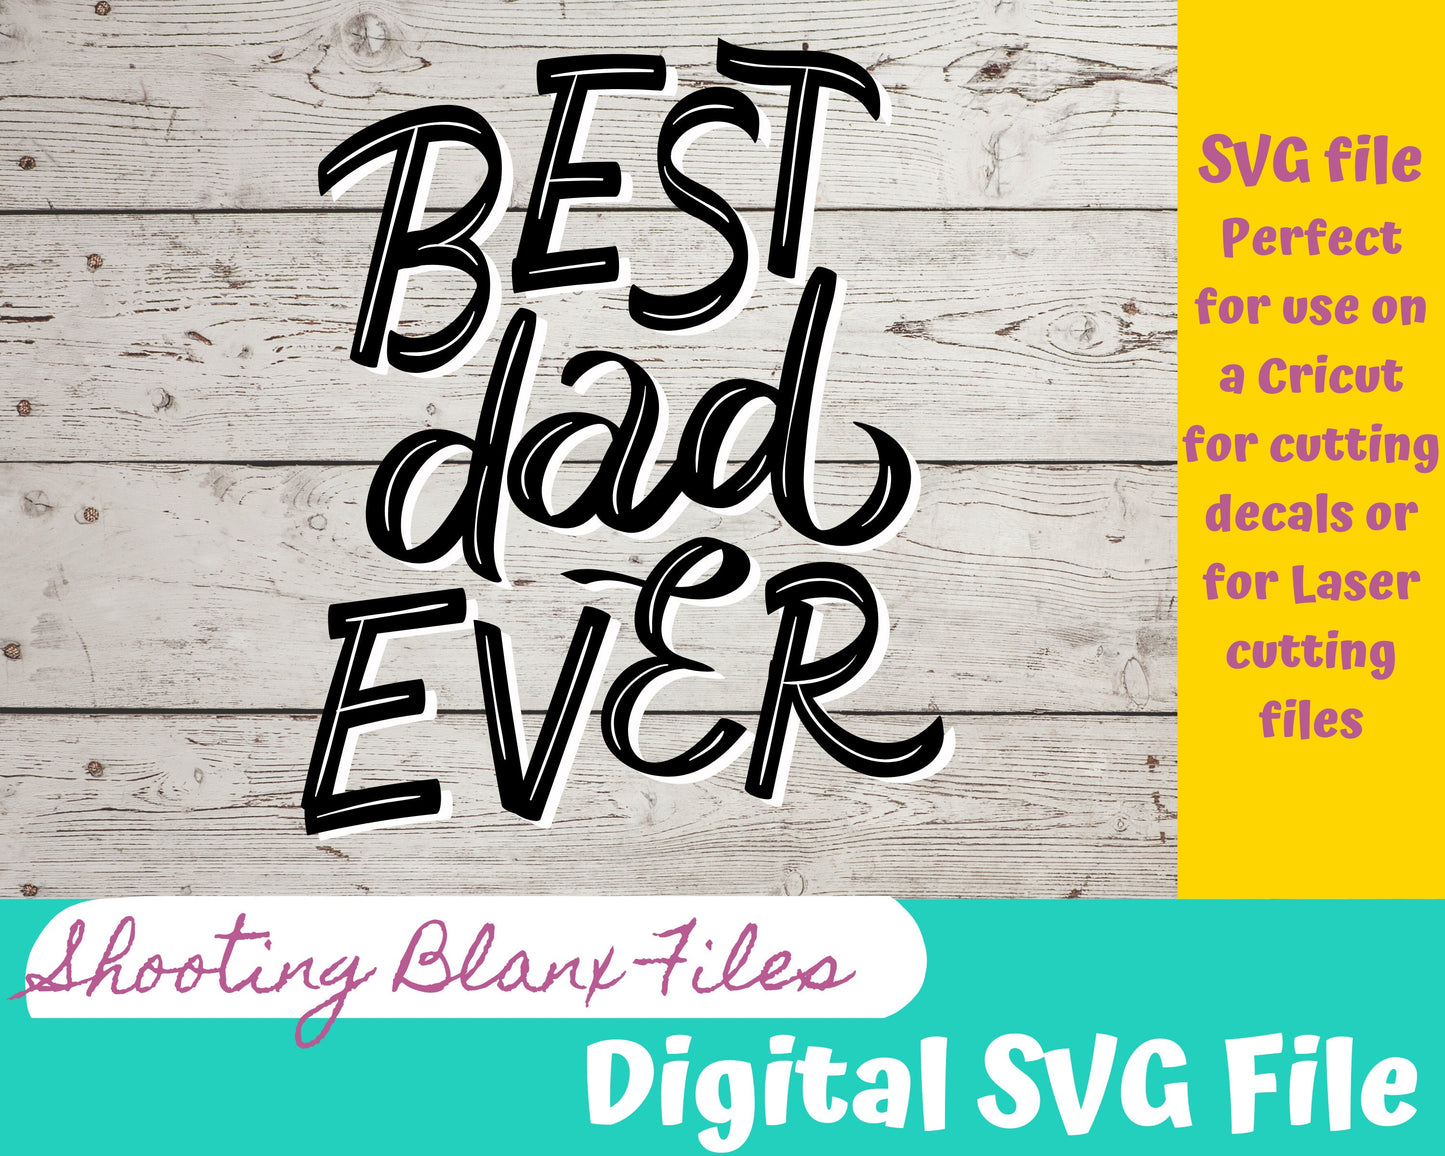 Best Dad Ever, Father's Day SVG file perfect for Cricut, Cameo, or Silhouette also great for laser engraving Glowforge , father, dad